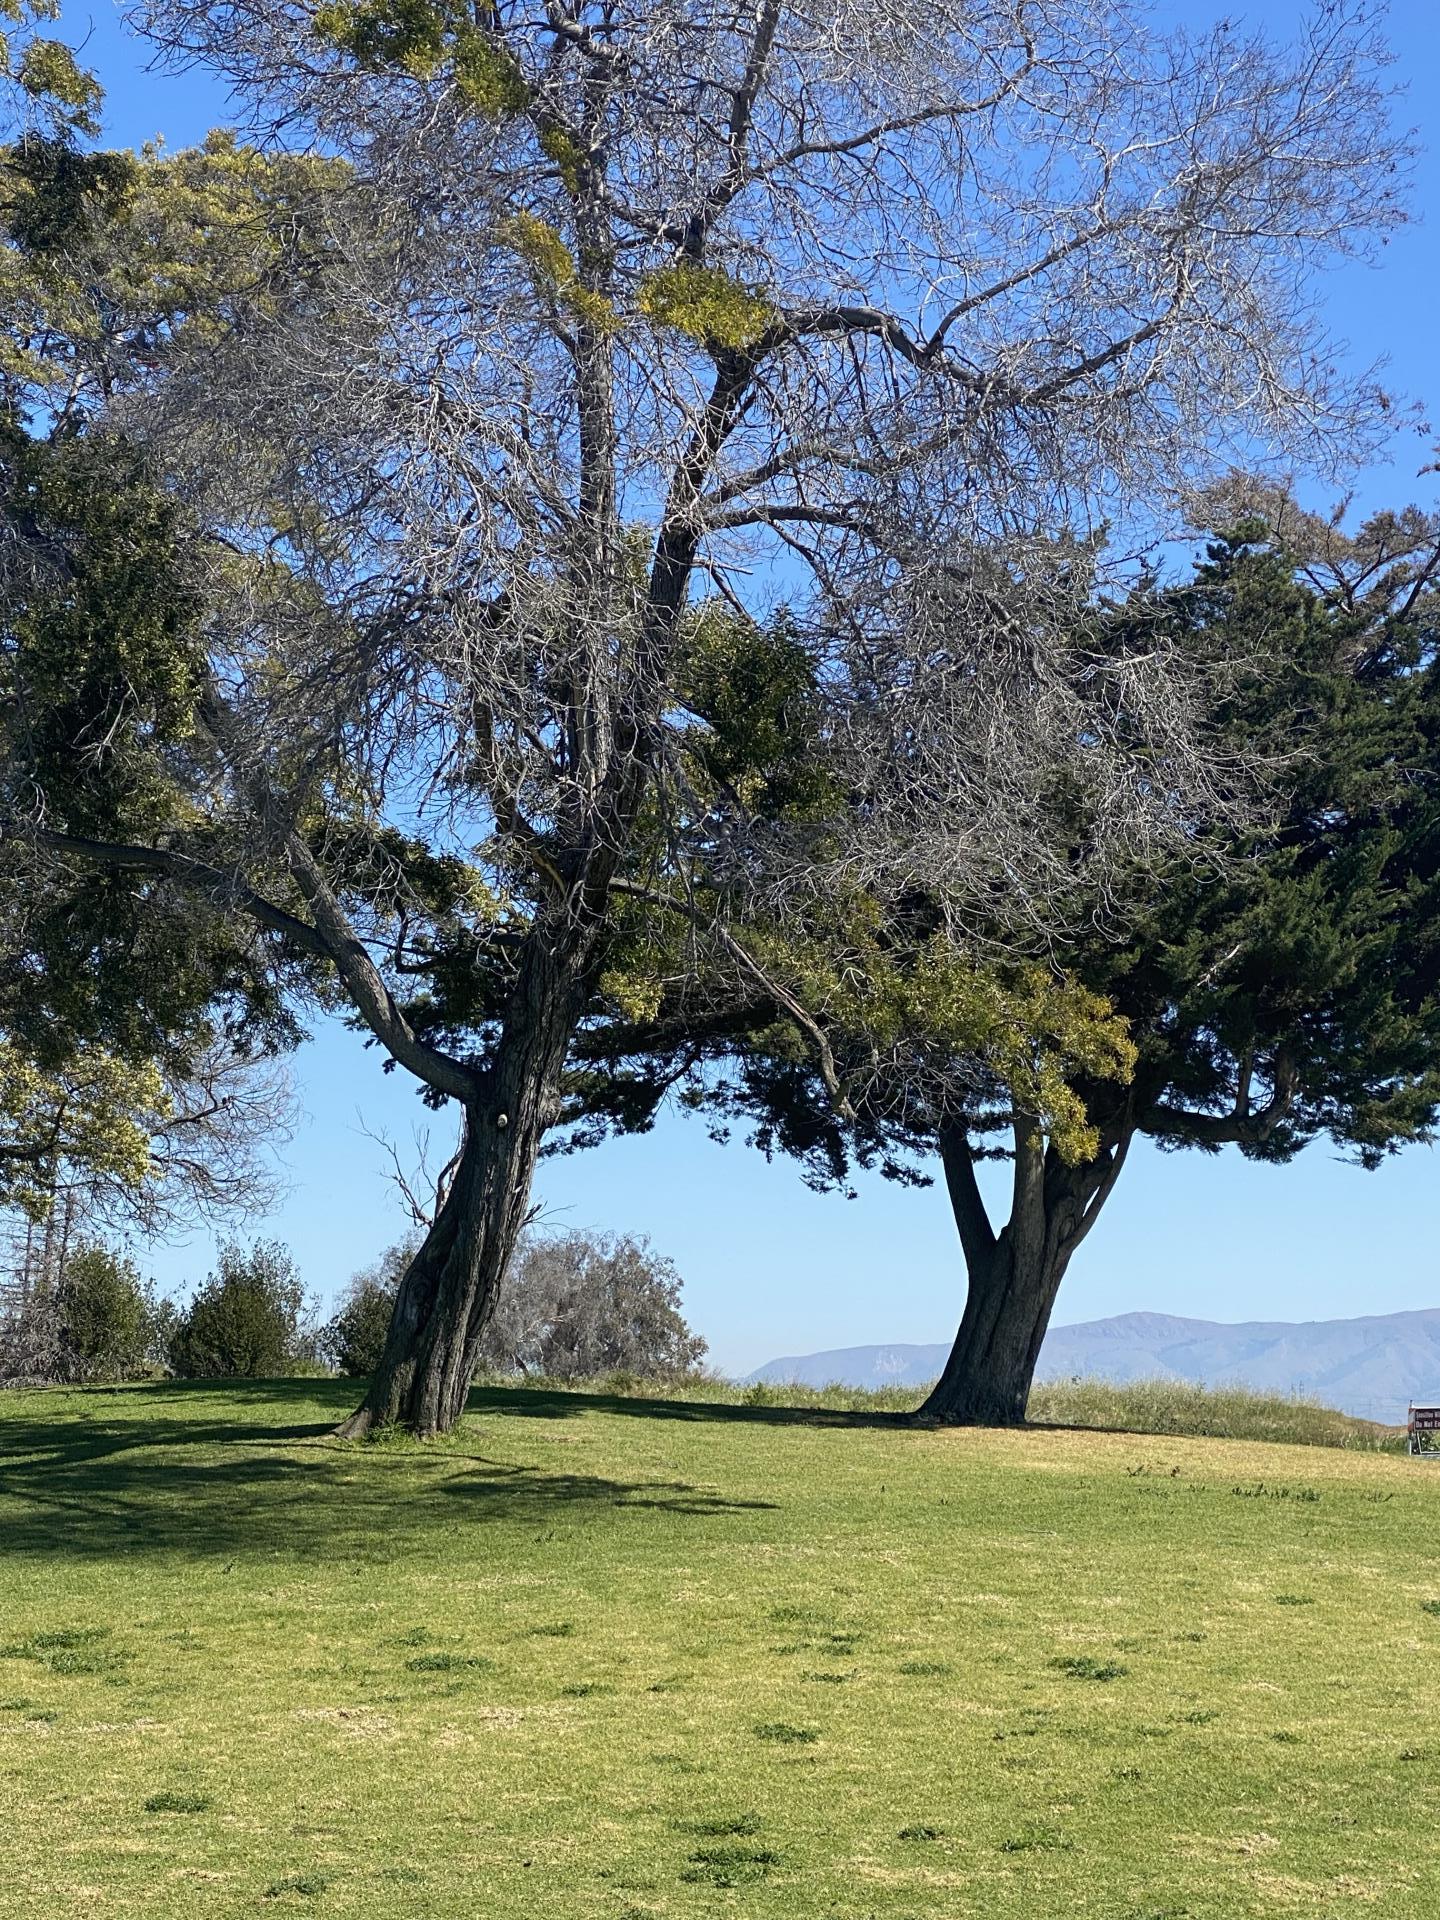 Trees at Shoreline at Mountain View Regional Park